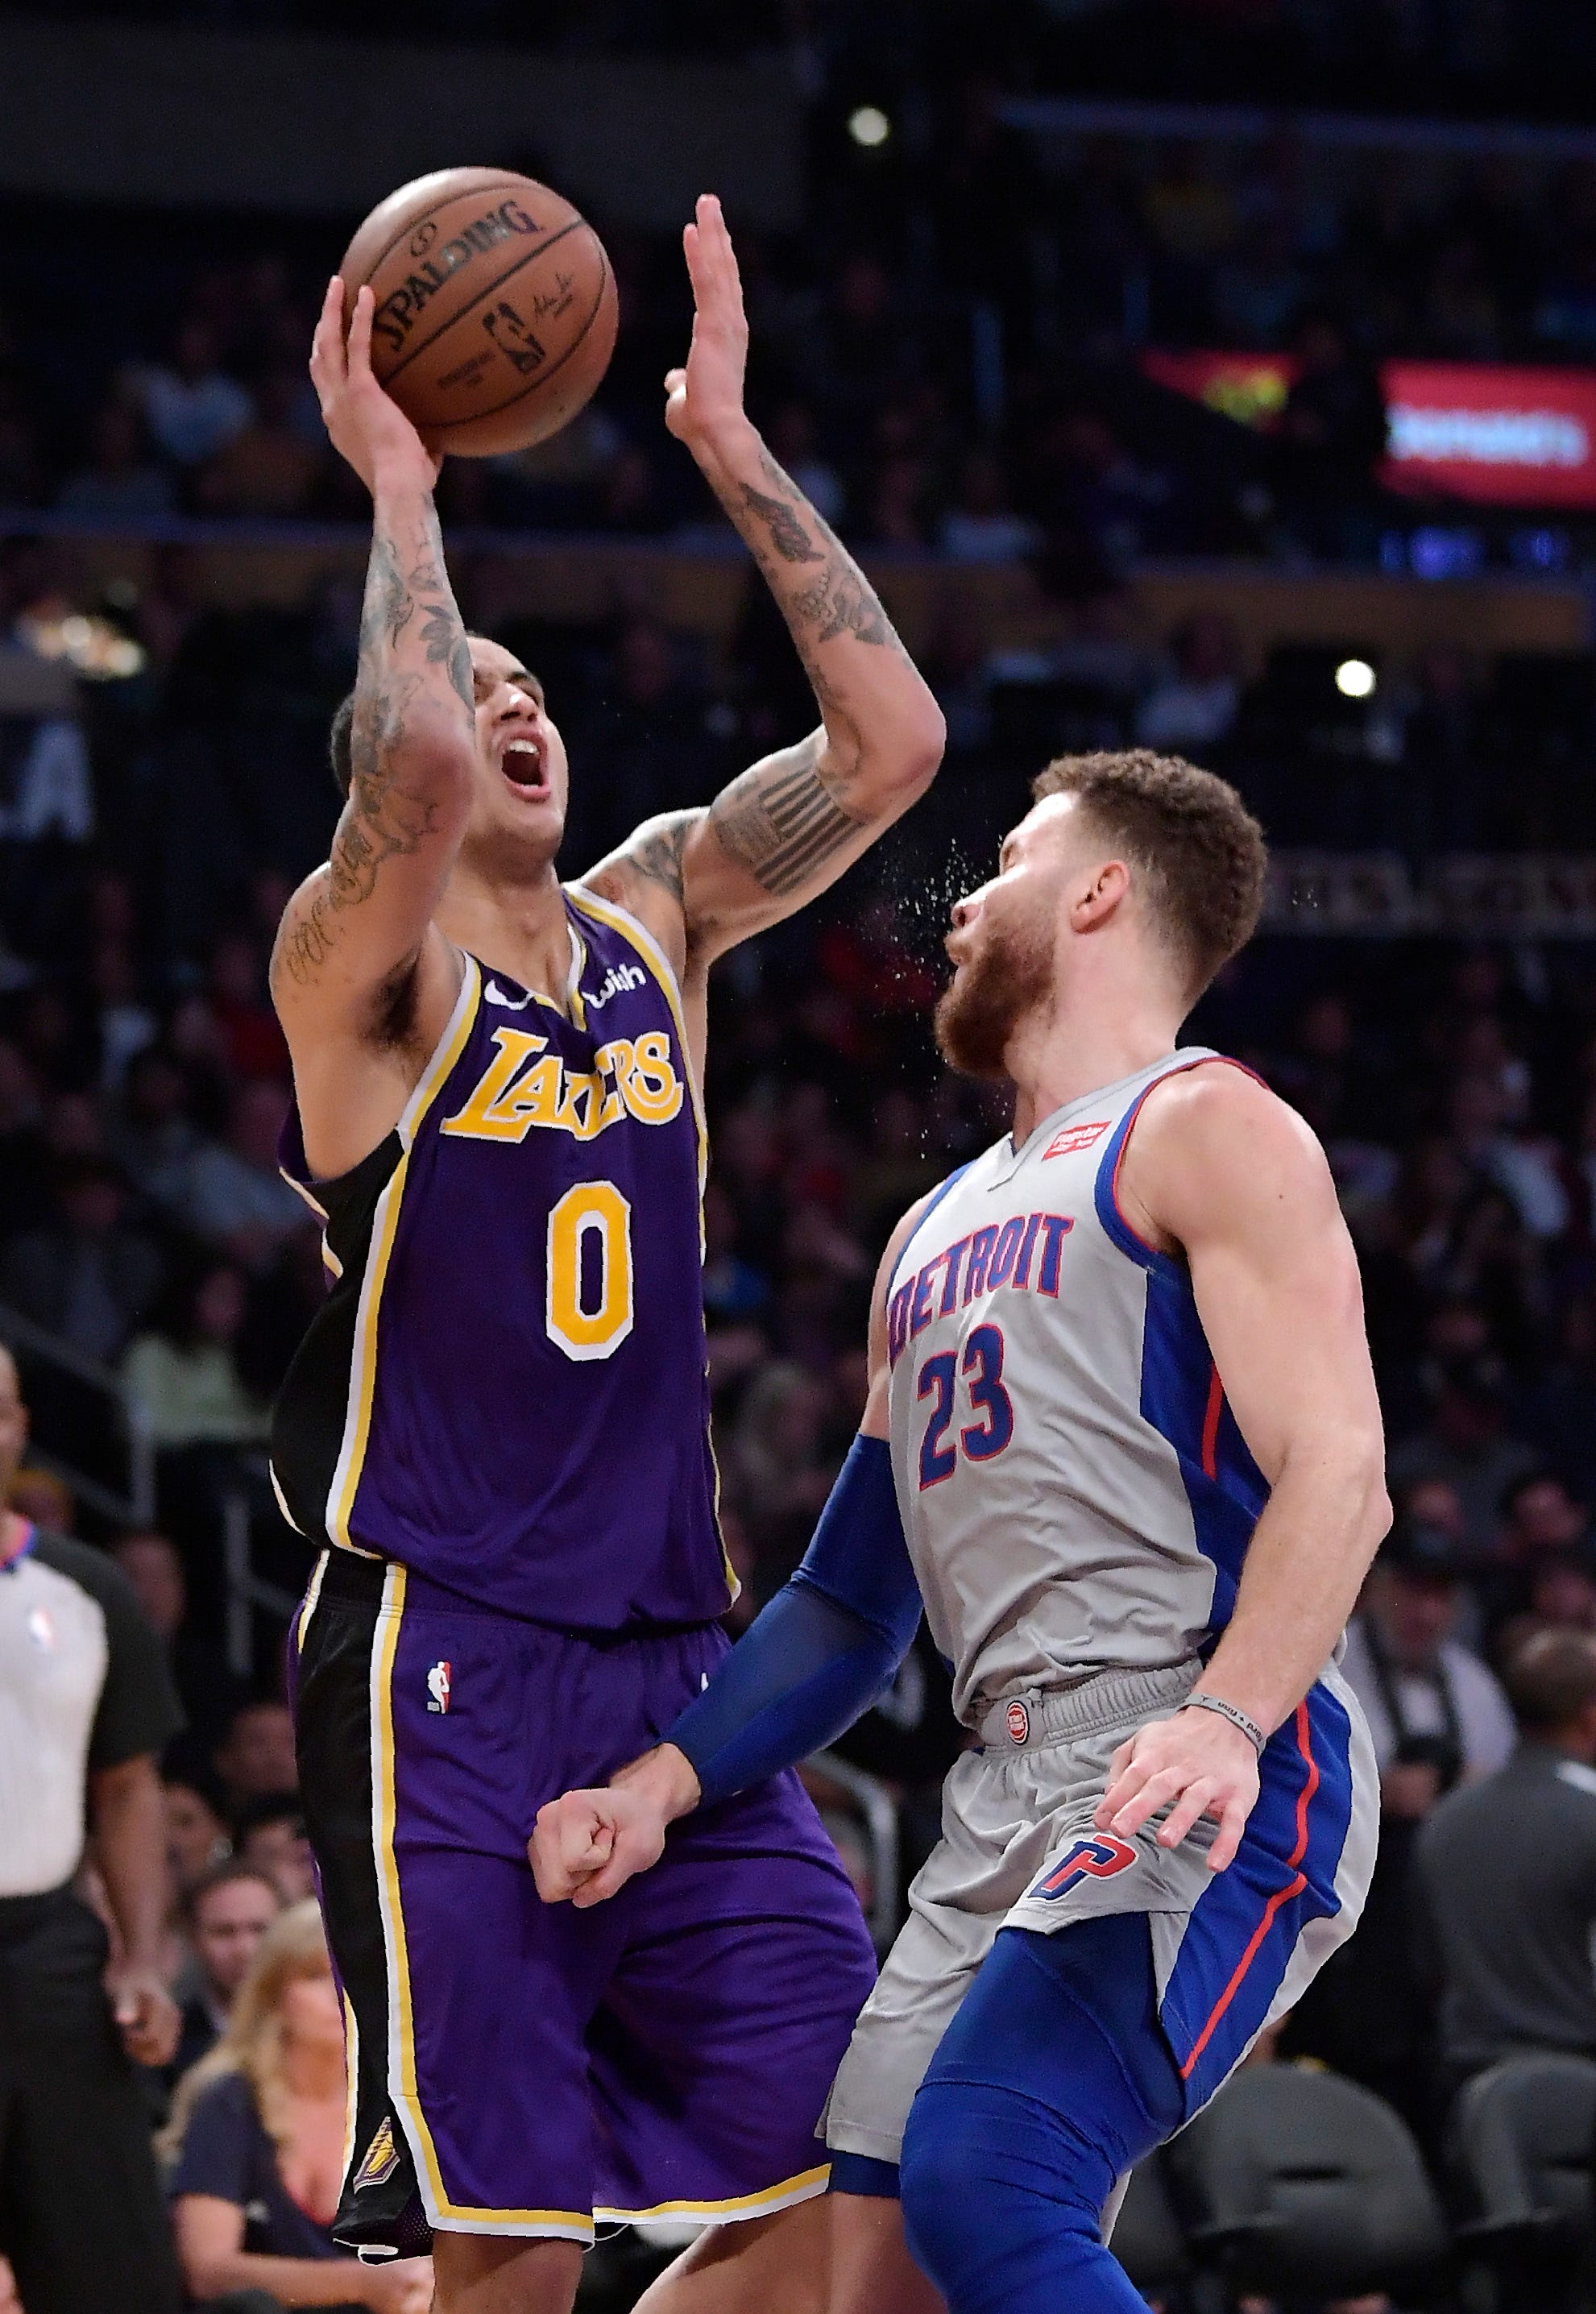 Los Angeles Lakers forward Kyle Kuzma, left, shoots as Detroit Pistons forward Blake Griffin defends during the second half.